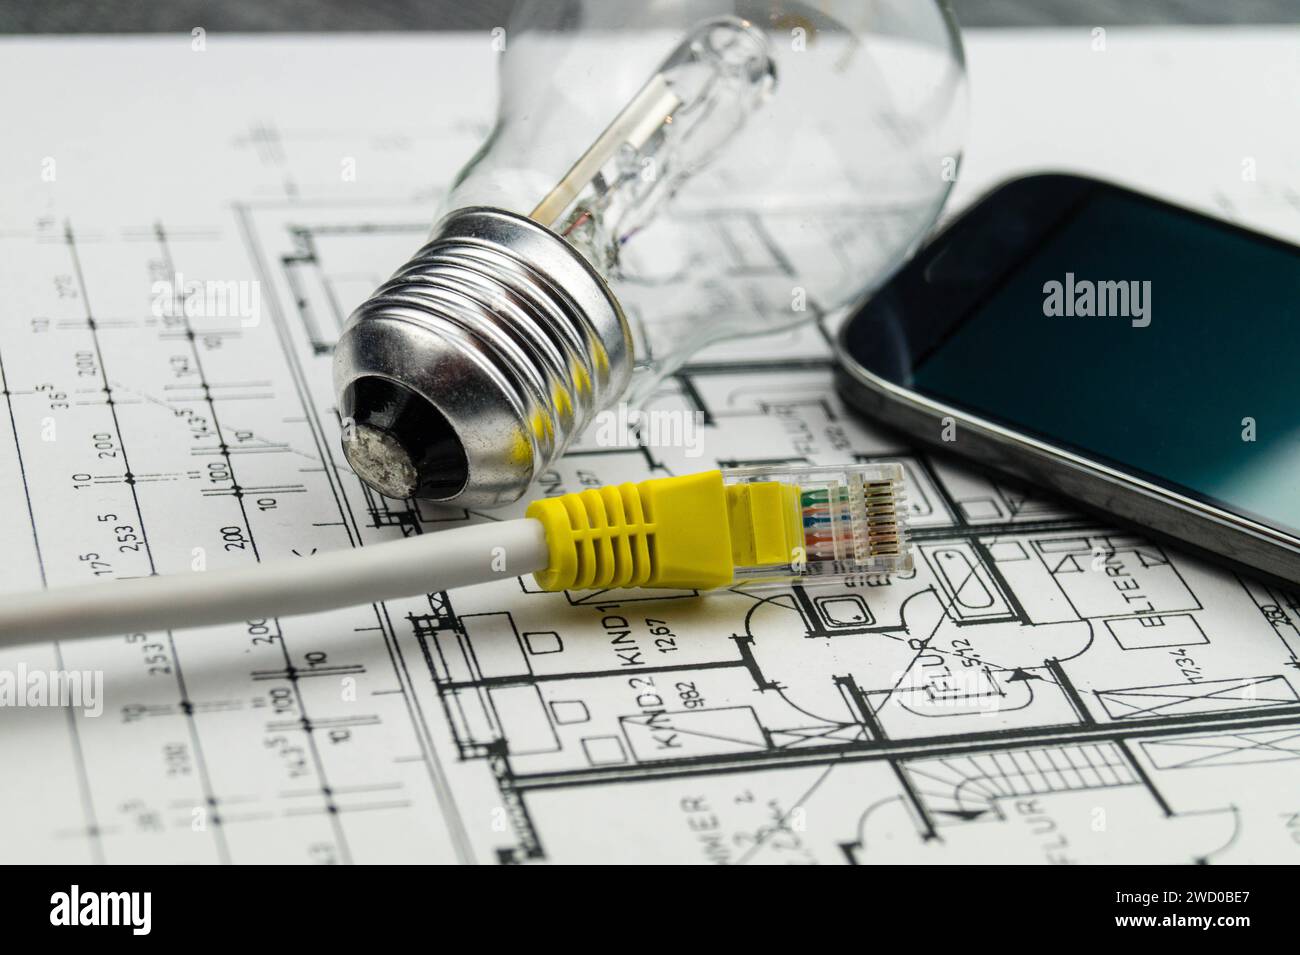 light bulb, network plug and smartphone on ground plan, symbolic image for smart home Stock Photo